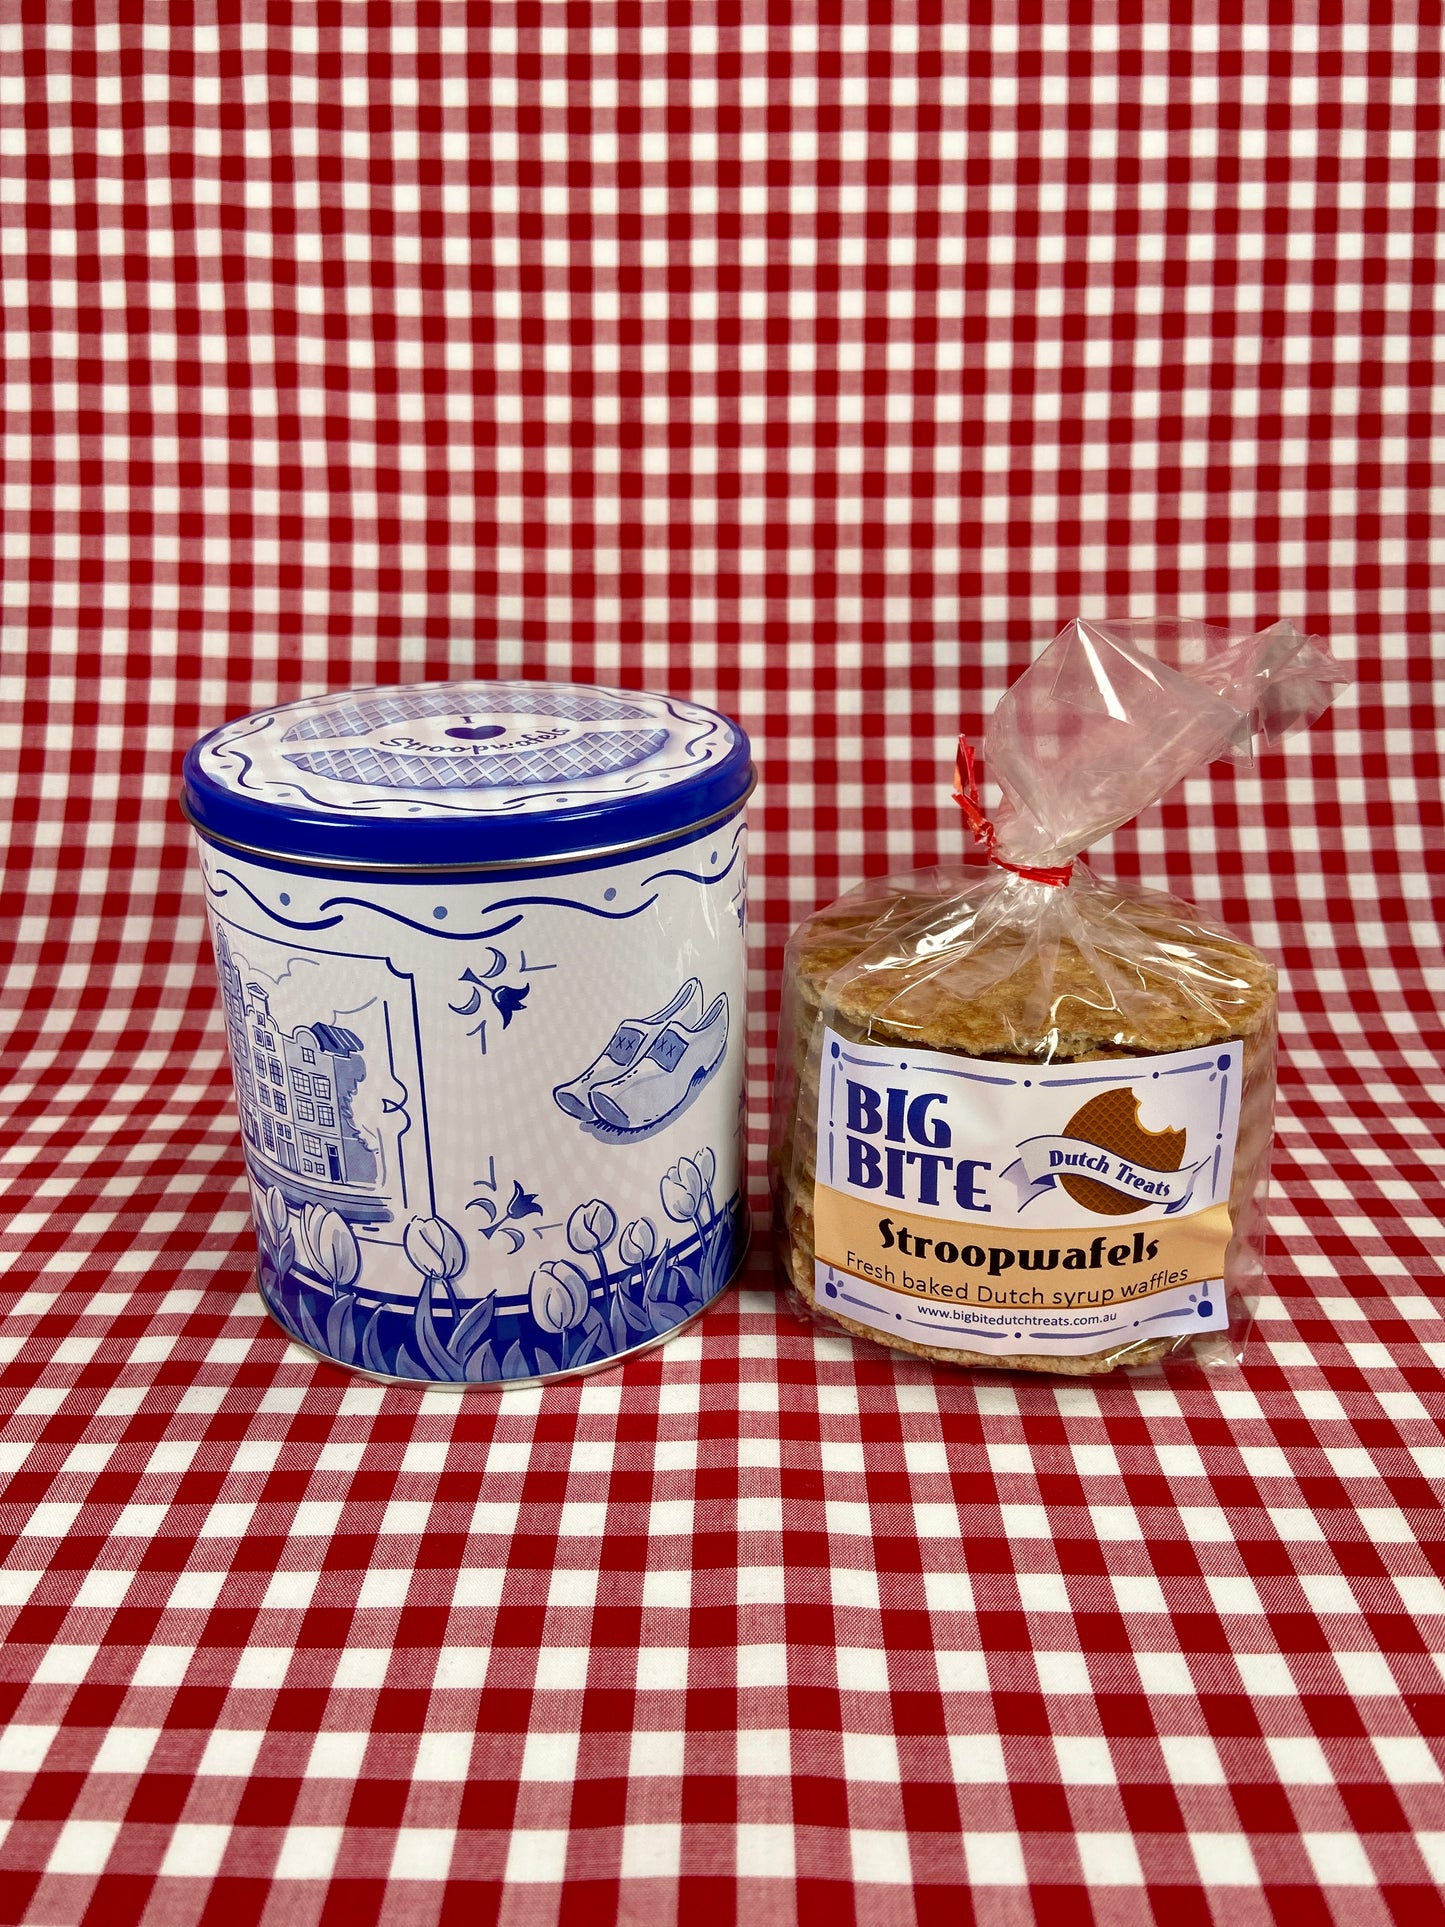 Dutch Delft blue tin with text I love stroopwafels and a pack of Dutch syrup waffles - Big Bite Dutch Treats